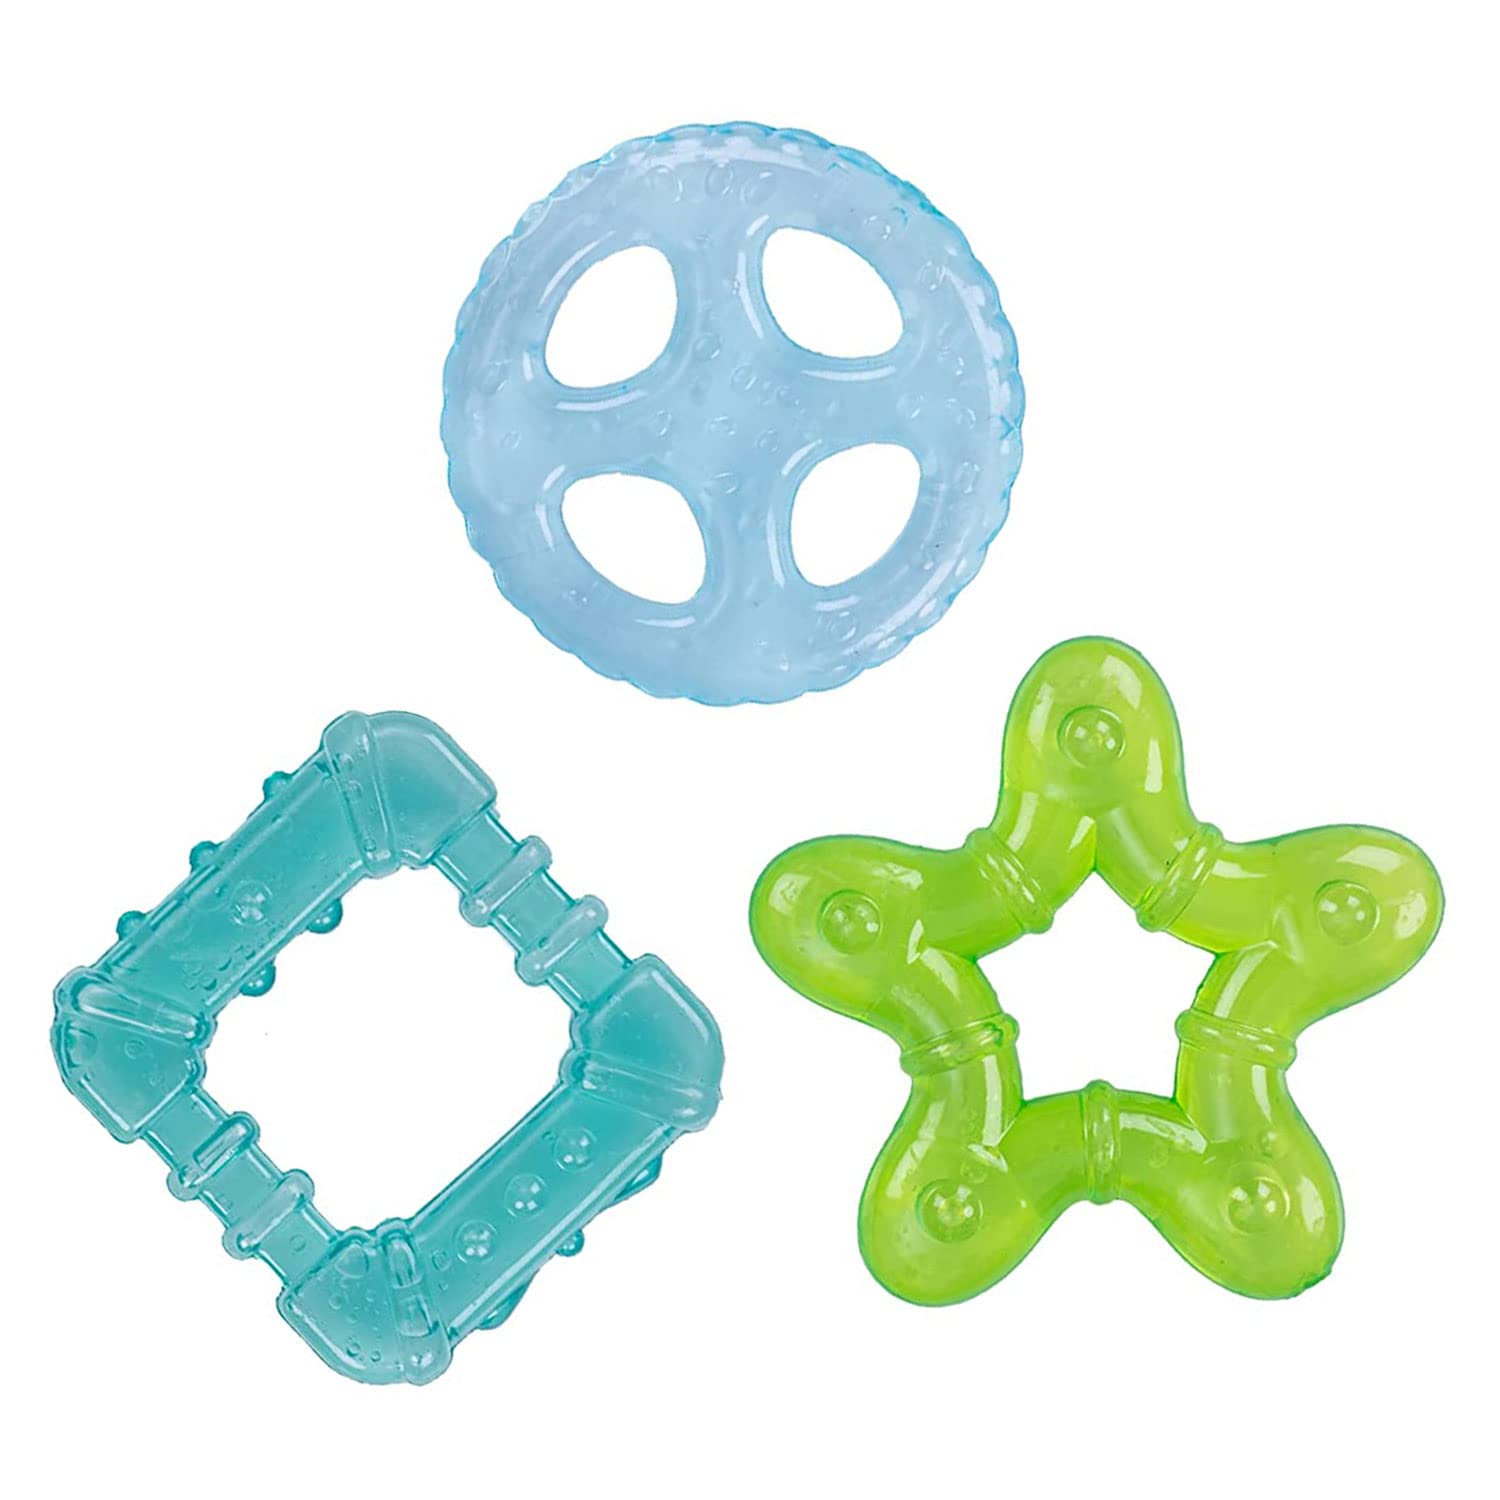 HOPOP BPA Free Water Filled Cooling Teether For Babies - Multicolor 3pcs 4m+